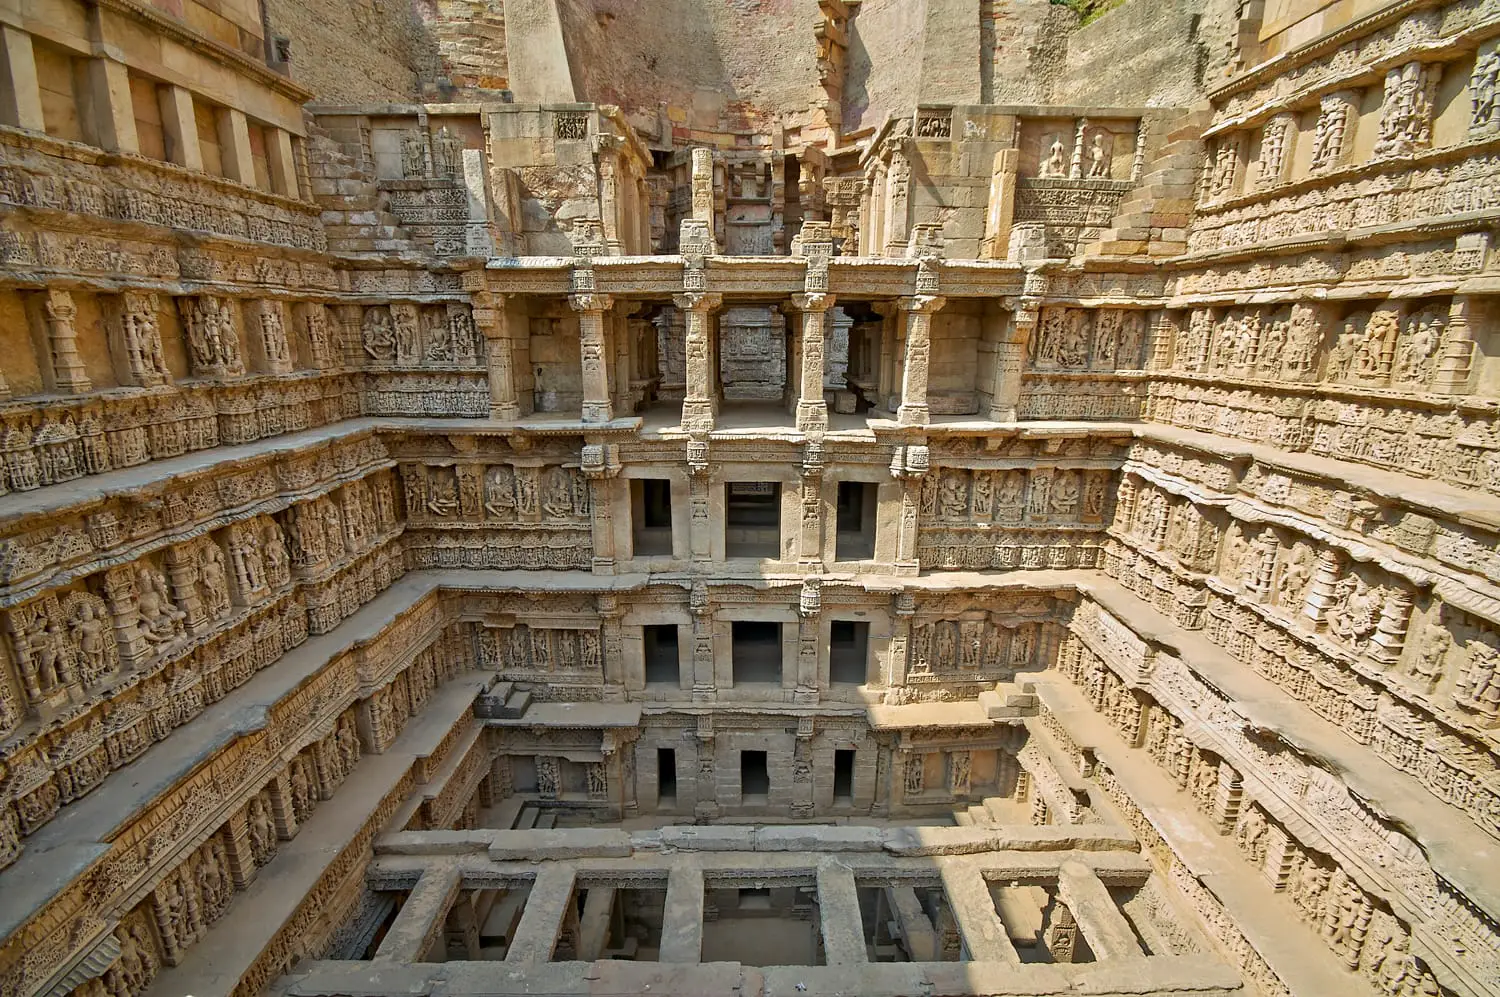 Ornate stone carved walls lining the 11th century Rav-Ki-Vav stepwell at Patan, Gujarat, India. Selected as a UNESCO world Heritage Site